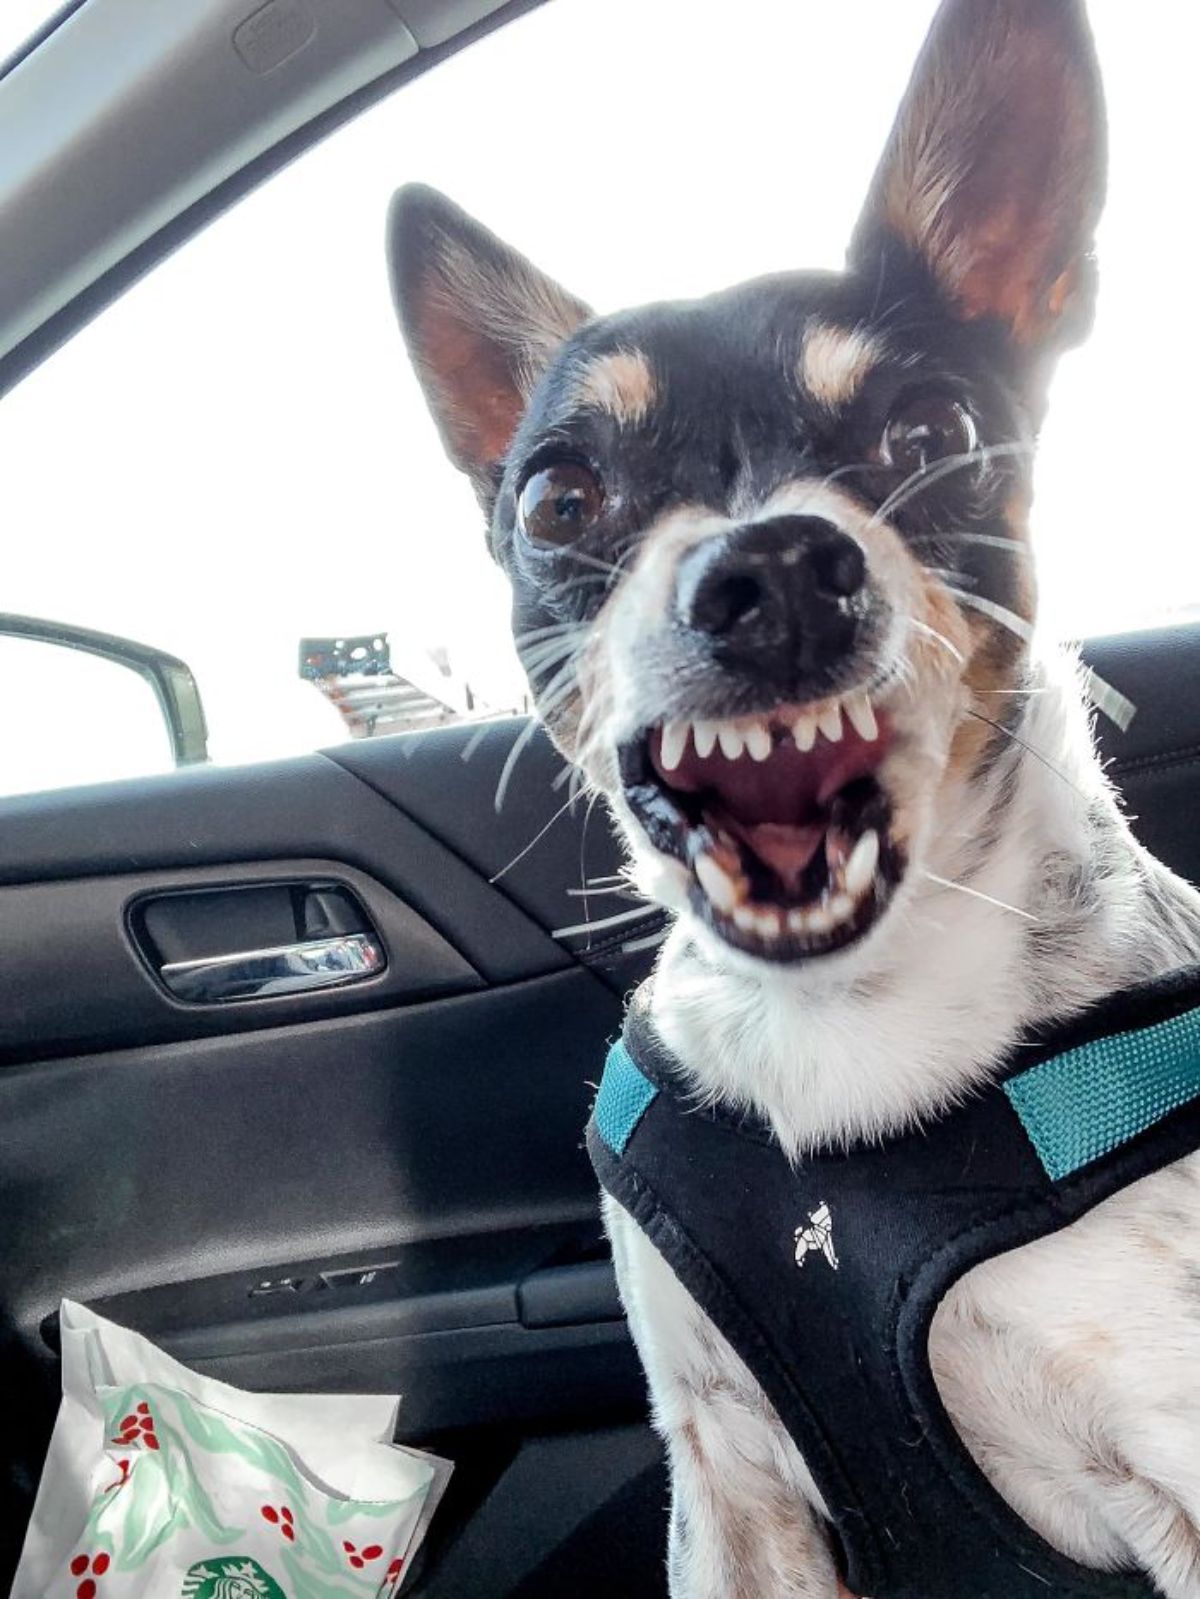 black white and brown dog wearing blue and black harness in a car with the mouth open in a bark